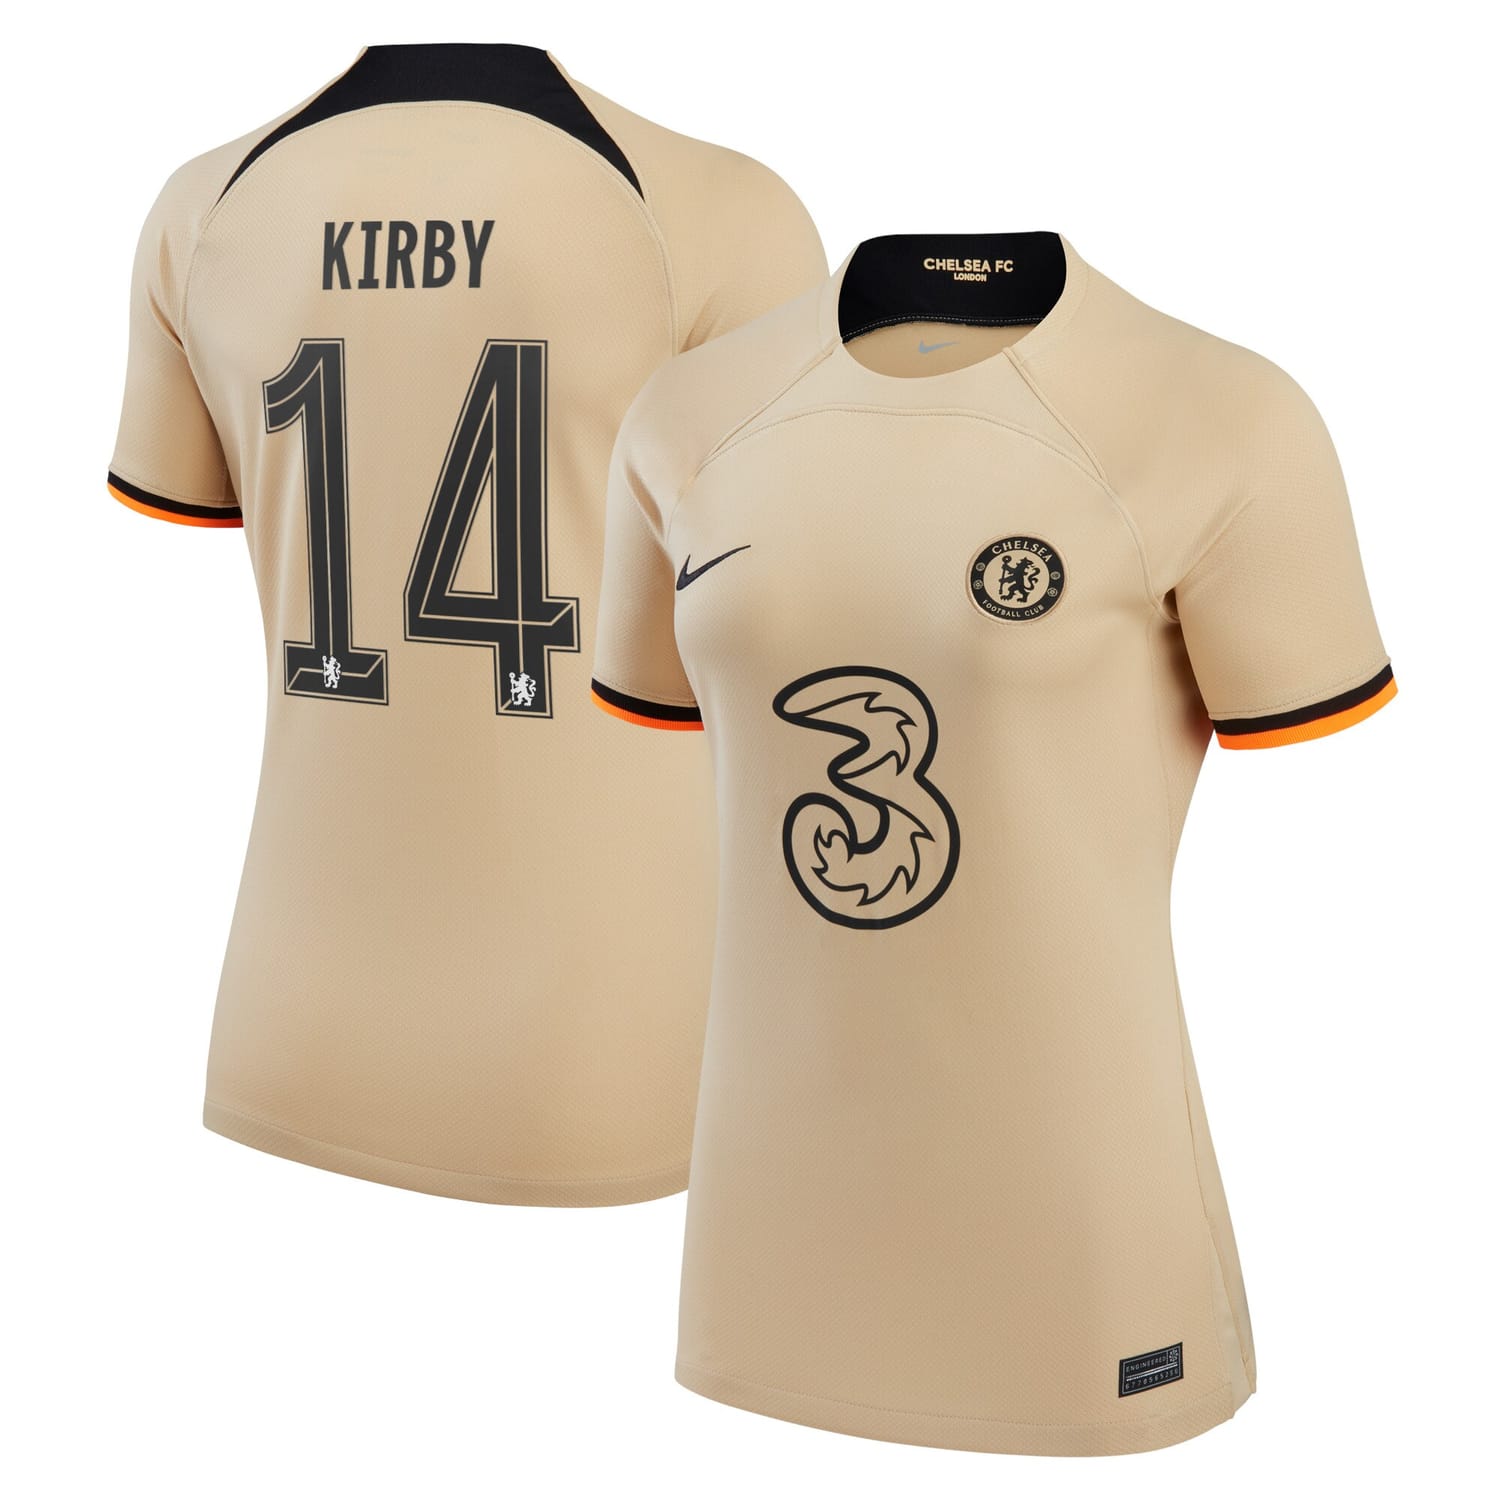 Premier League Chelsea Third Cup Jersey Shirt 2022-23 player Fran Kirby 14 printing for Women